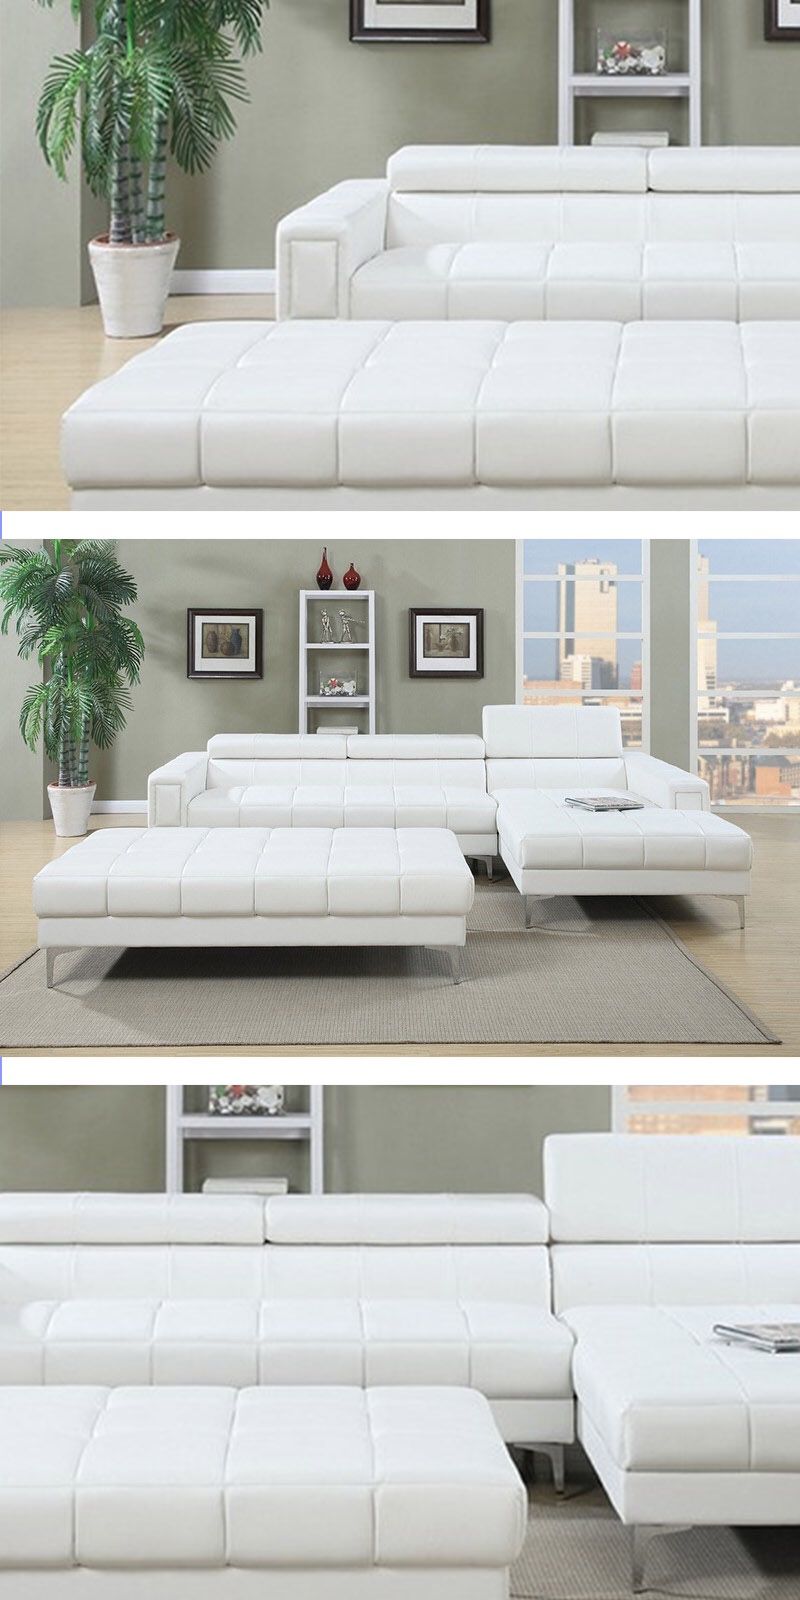 SECTIONAL | LIVING ROOM | COUCH | LOVESEAT | SOFA | JUEGO DE SALA | DELIVERY FREE BY TMF 🚚📦